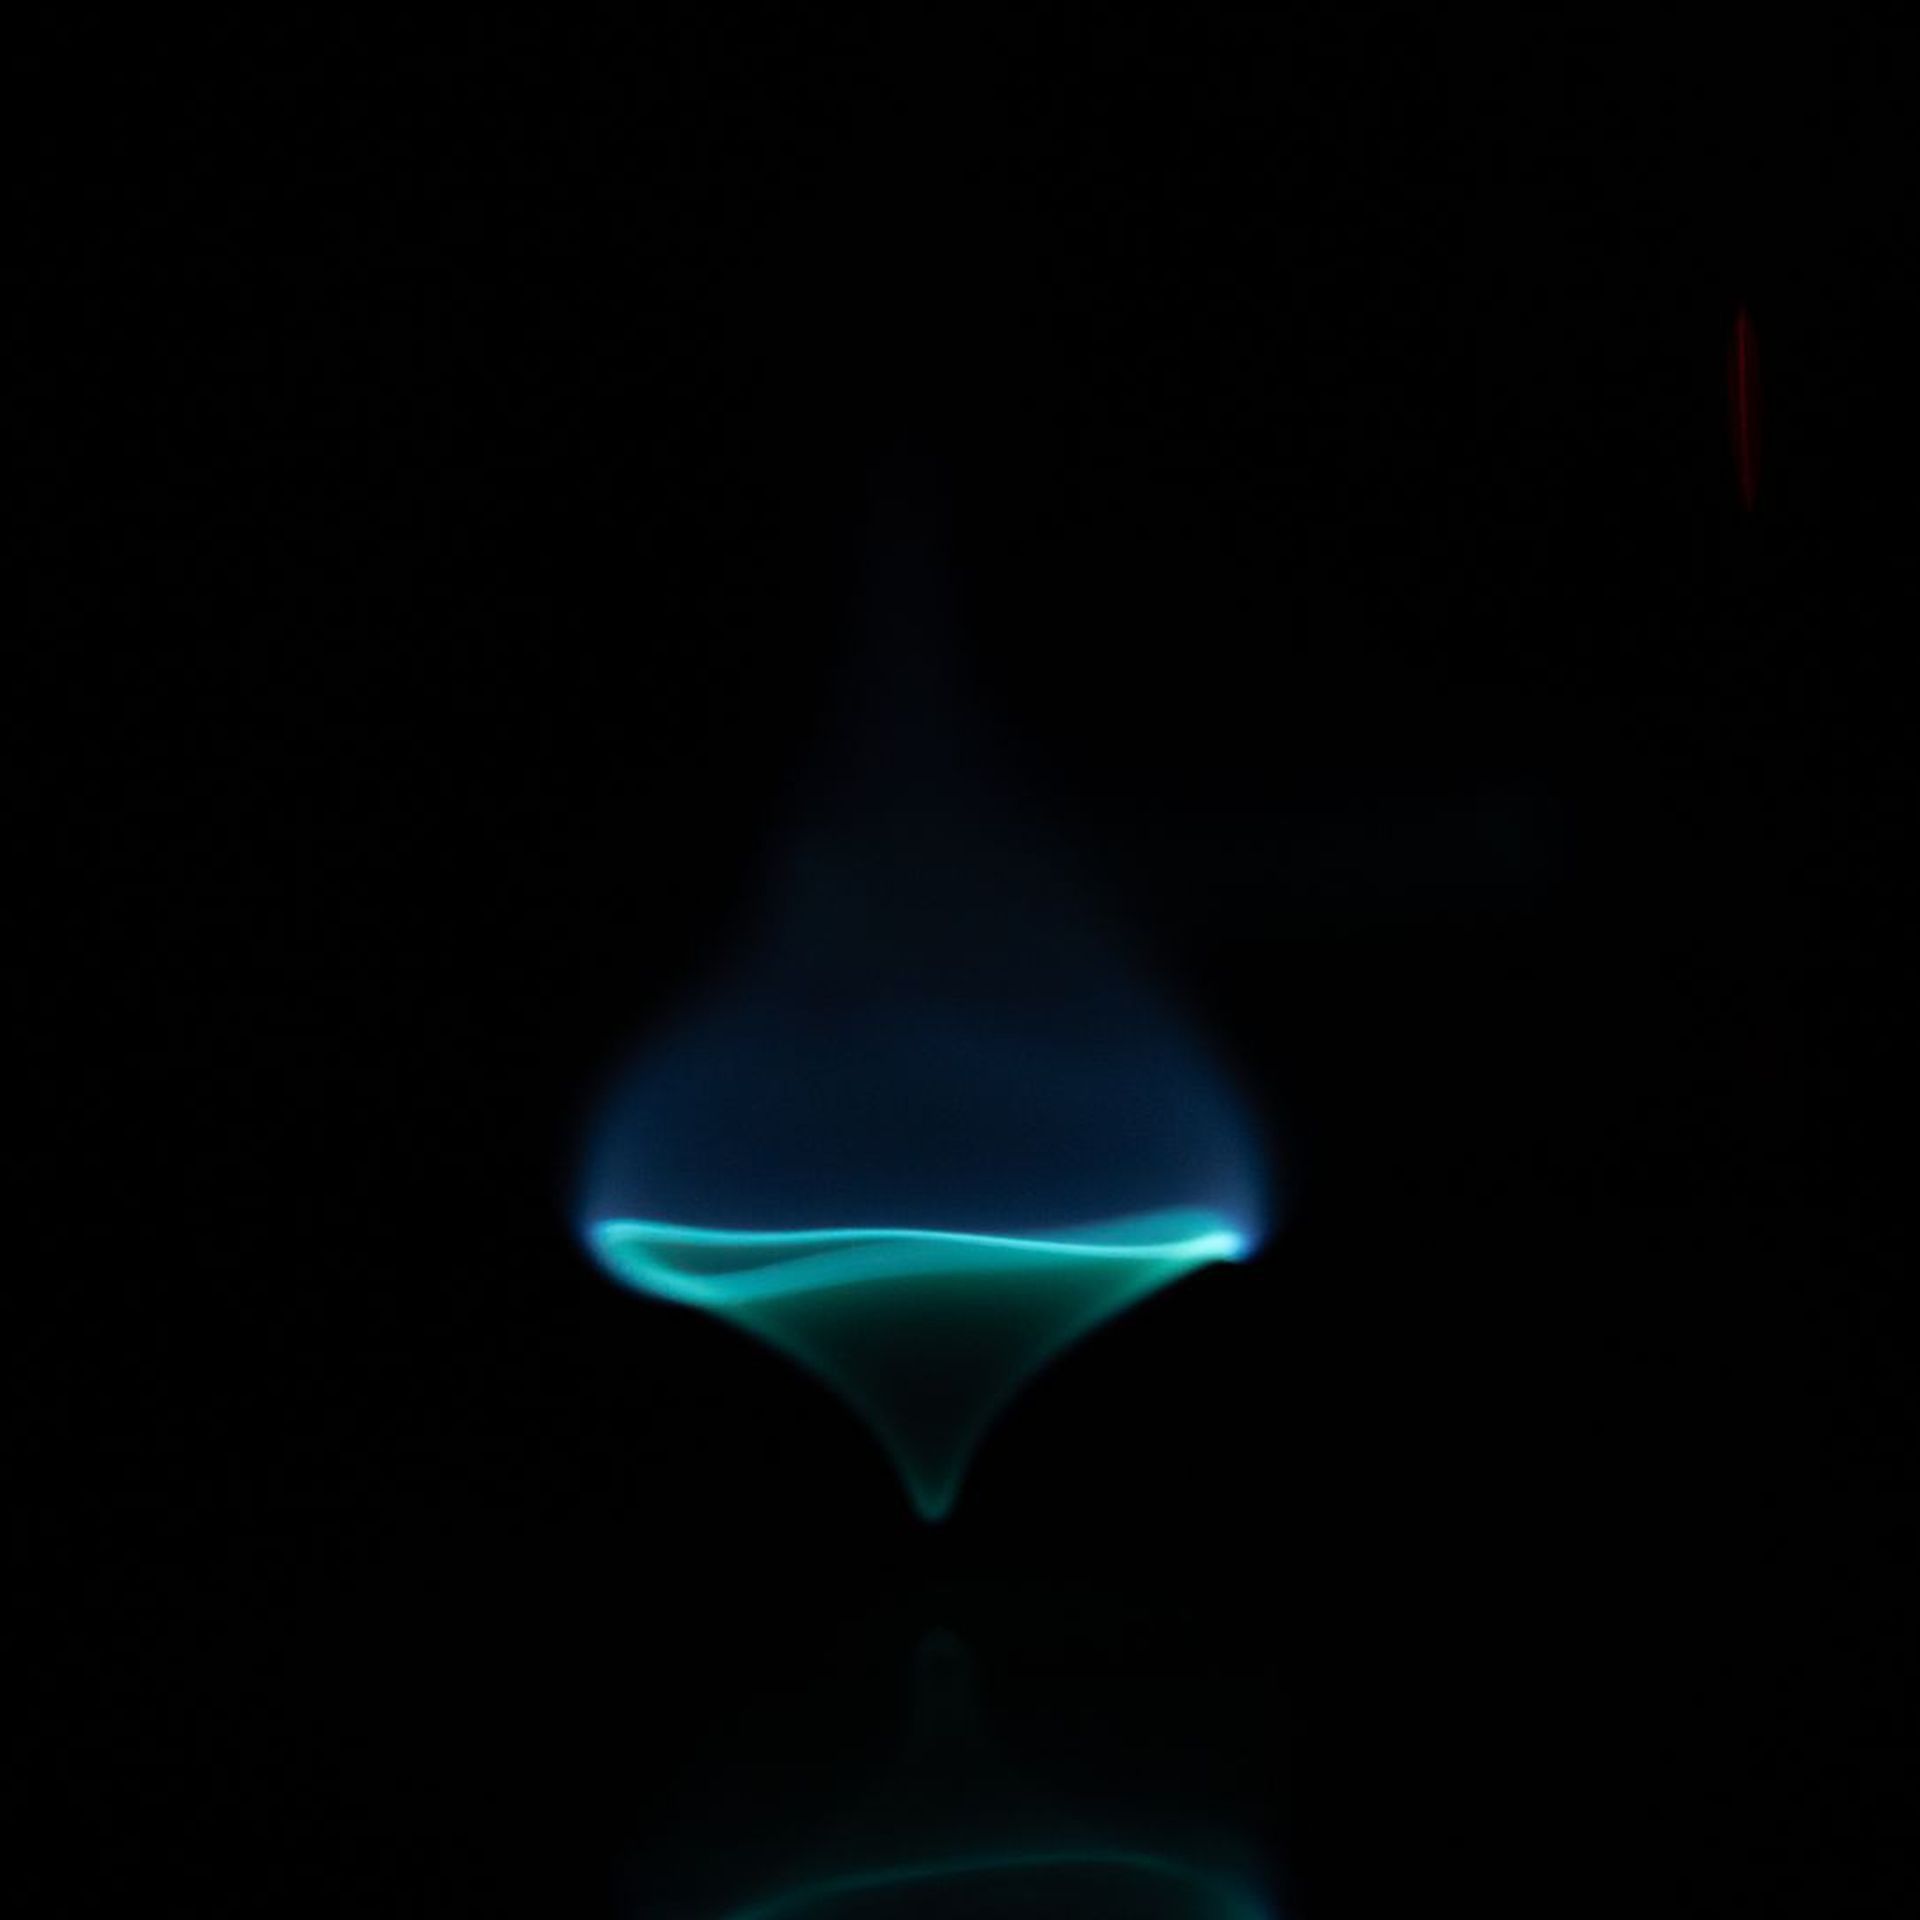 Revealing the structure of the mysterious blue whirling flame